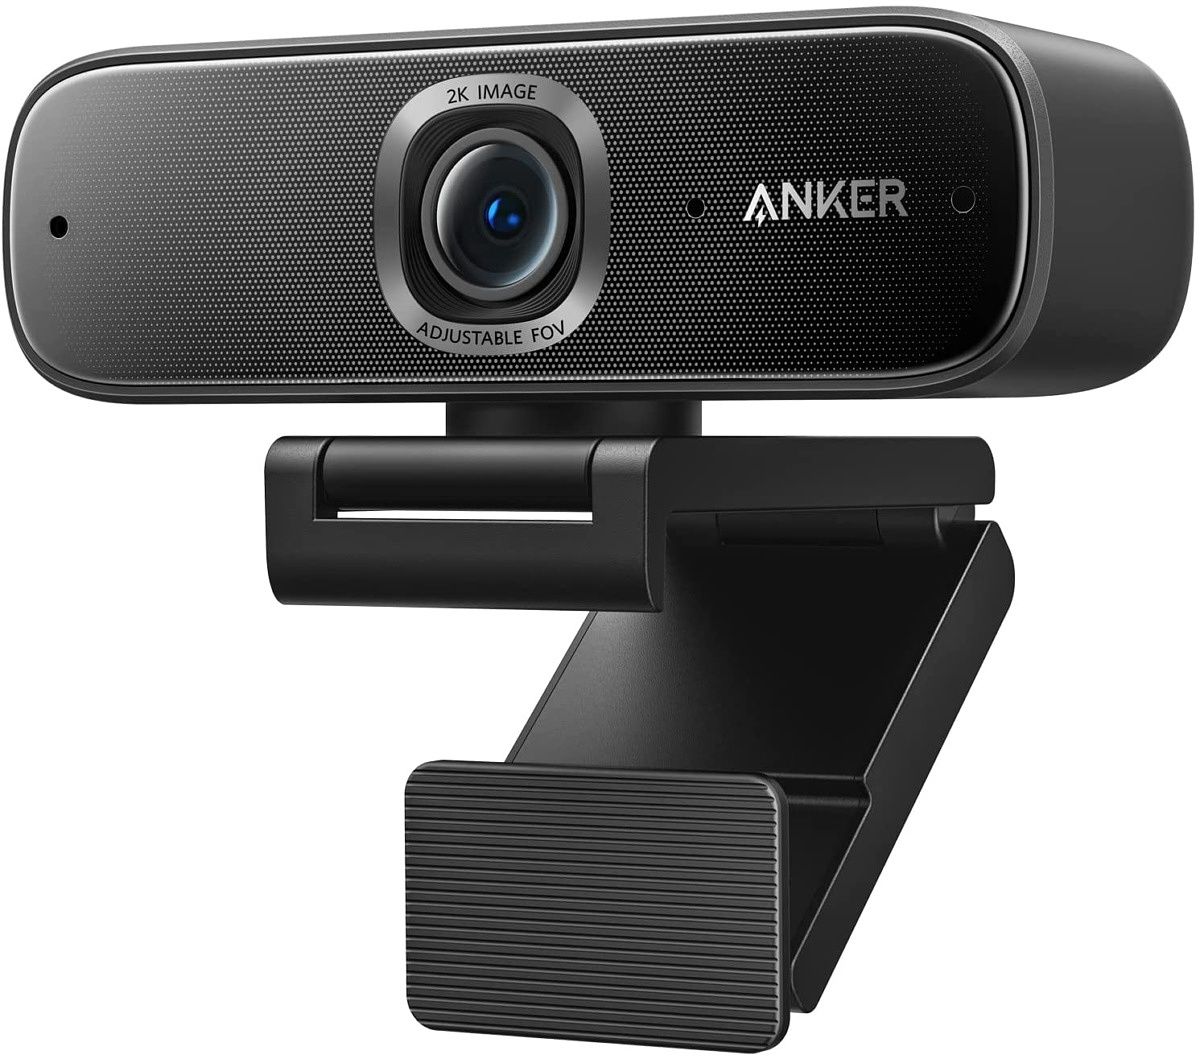 The Anker PowerConf C302 is a great webcam if you're participating in calls with a big group thanks to its wide field of view. Plus, you can adjust its position, and it features solid webcam quality at 2K and 30fps, along with some AI features to improve image quality.